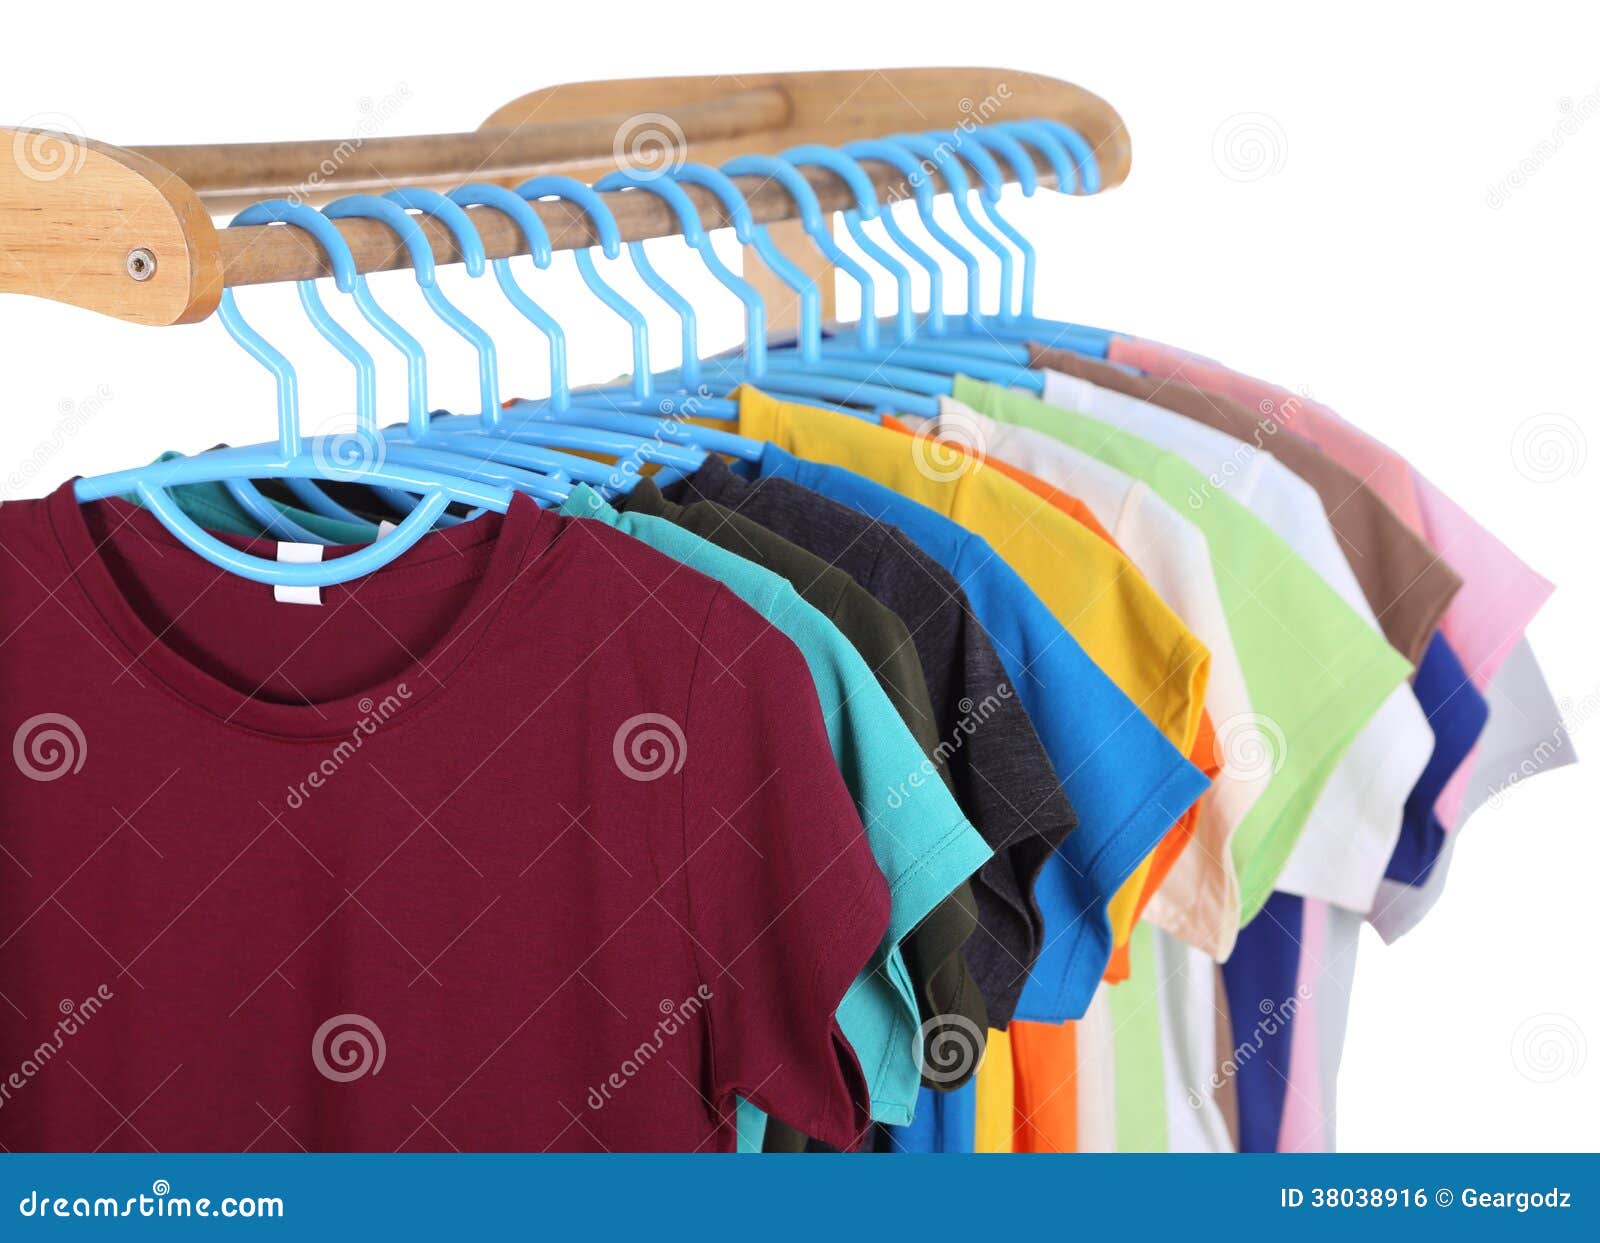 T-shirts Hanging on Hangers Stock Photo - Image of cotton, dress: 38038916